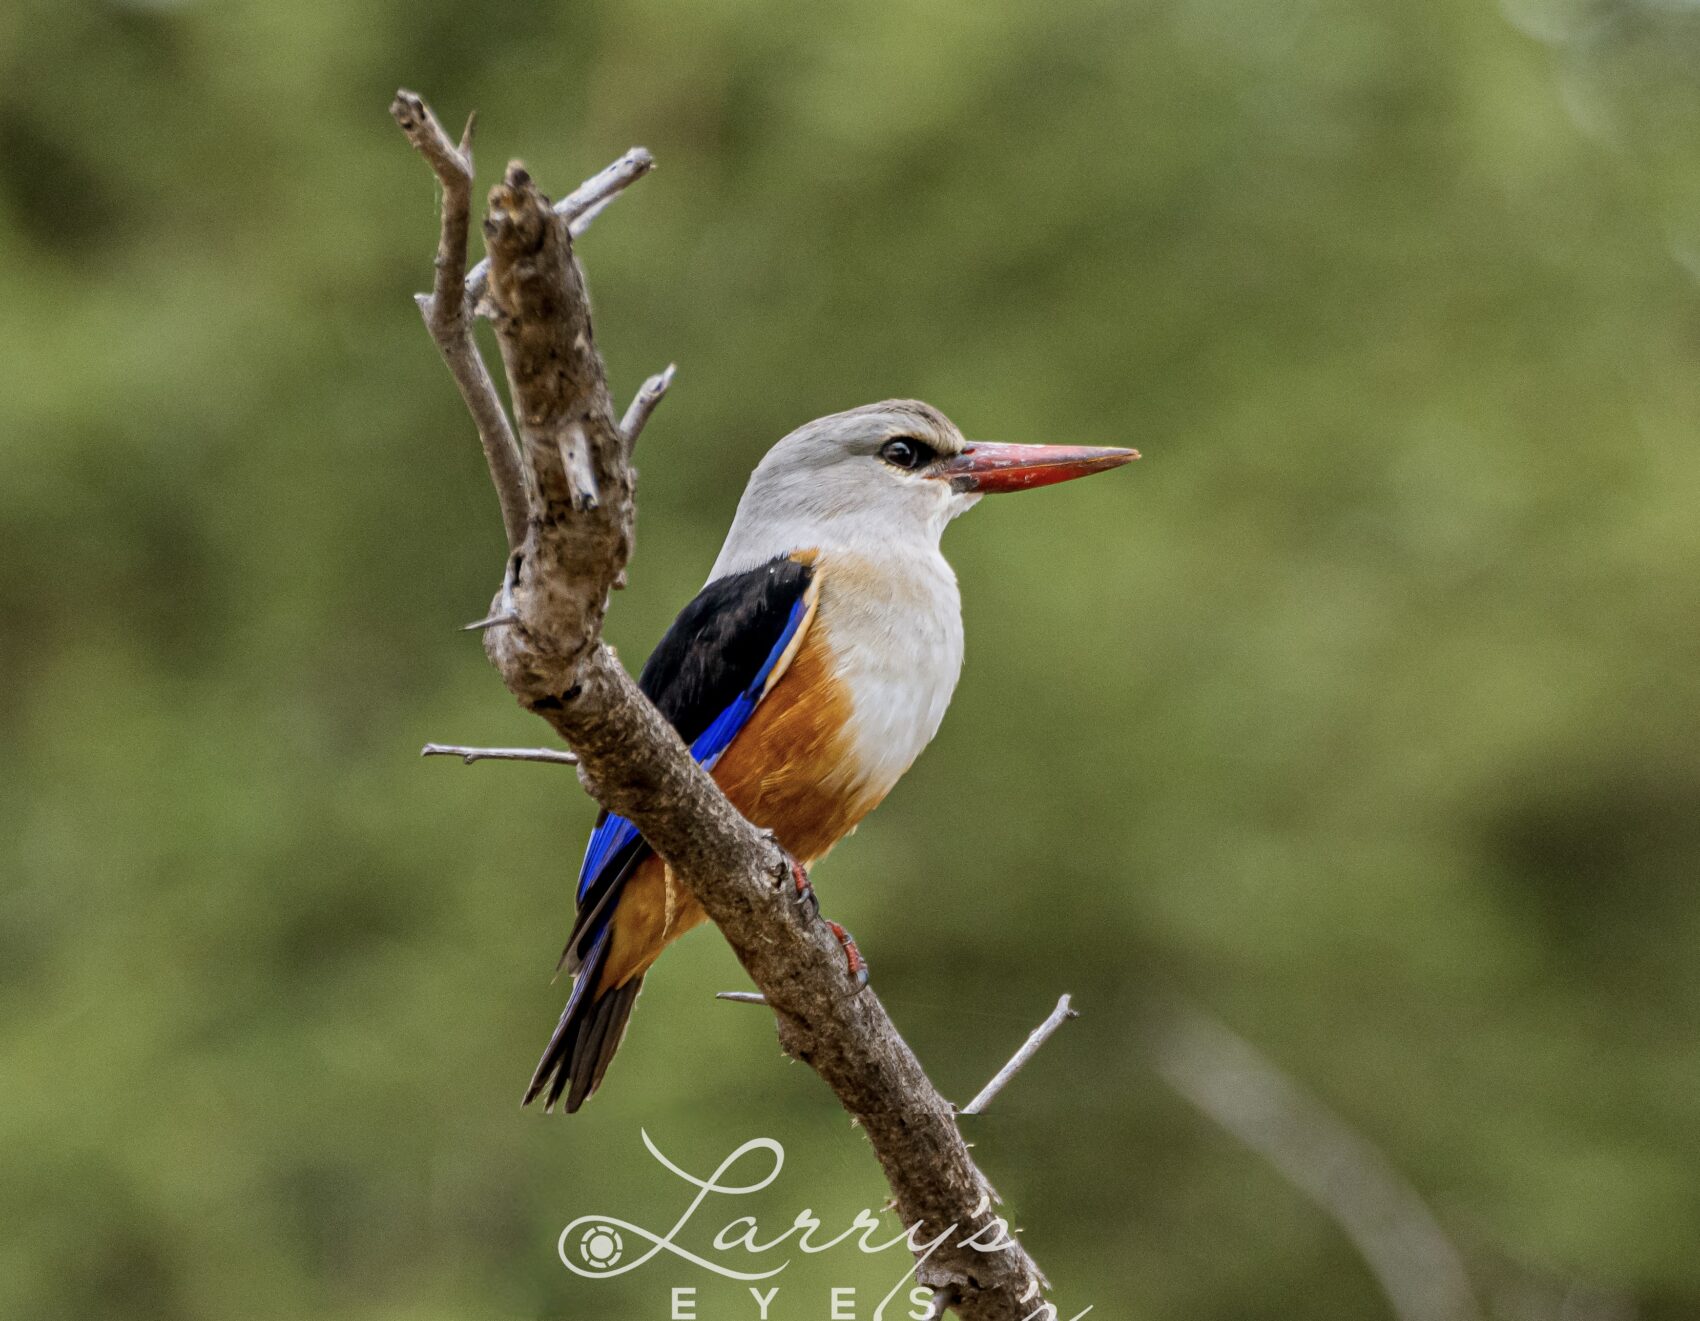 Grey-headed Kingfisher seen in Namibia during the GBT's annual fundraising birding trip.